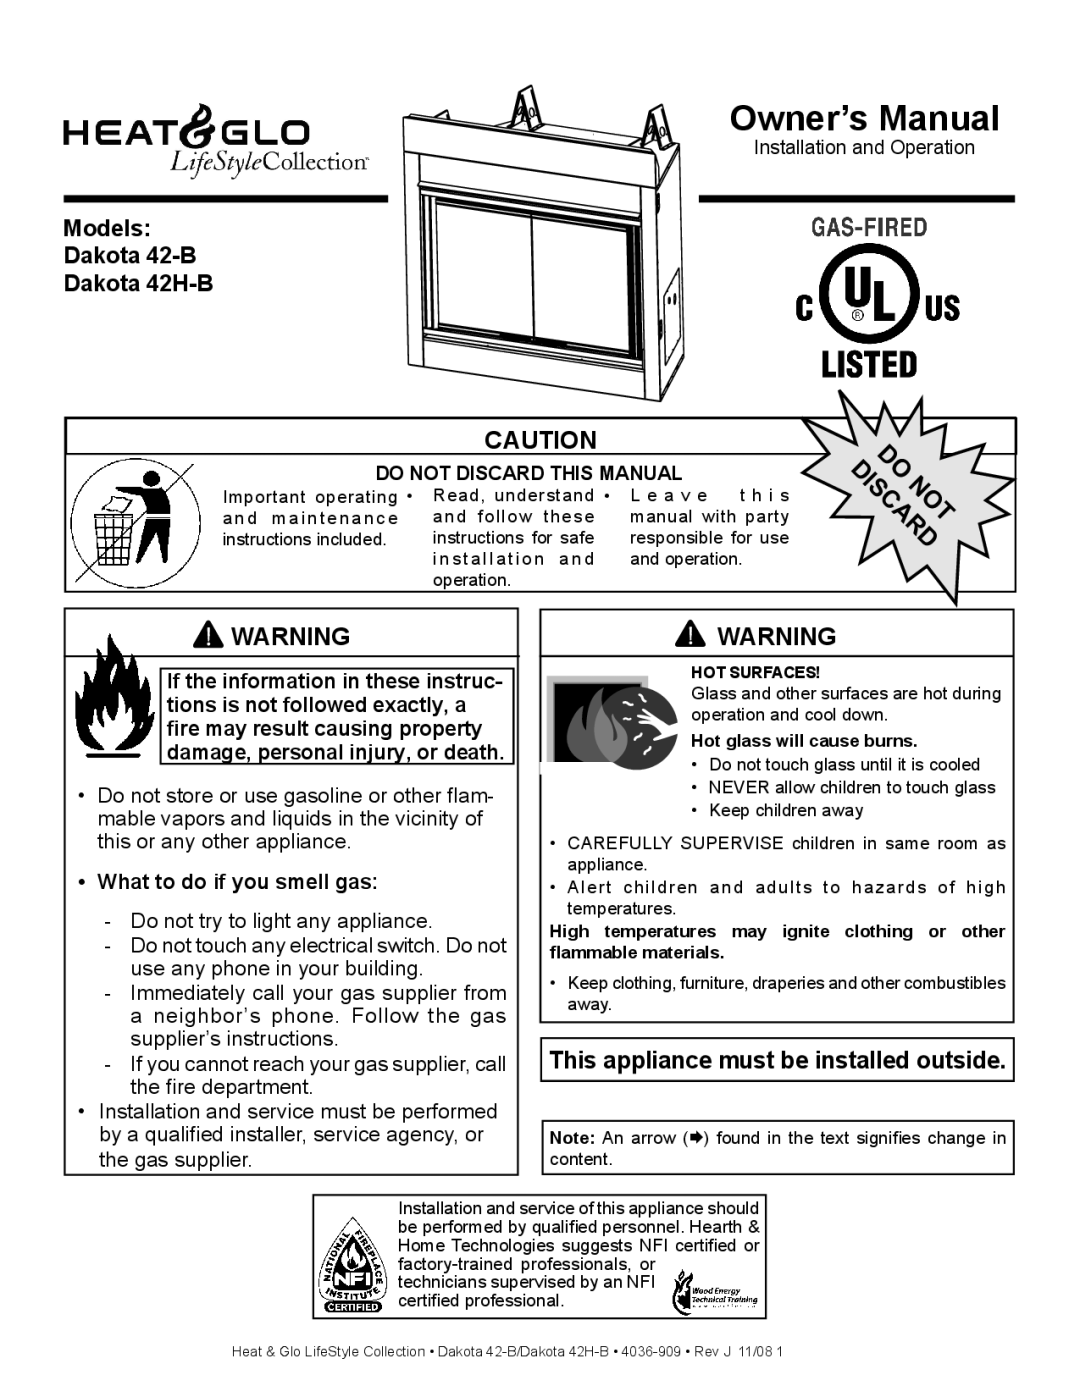 Hearth and Home Technologies 42-B owner manual This appliance must be installed outside, What to do if you smell gas 